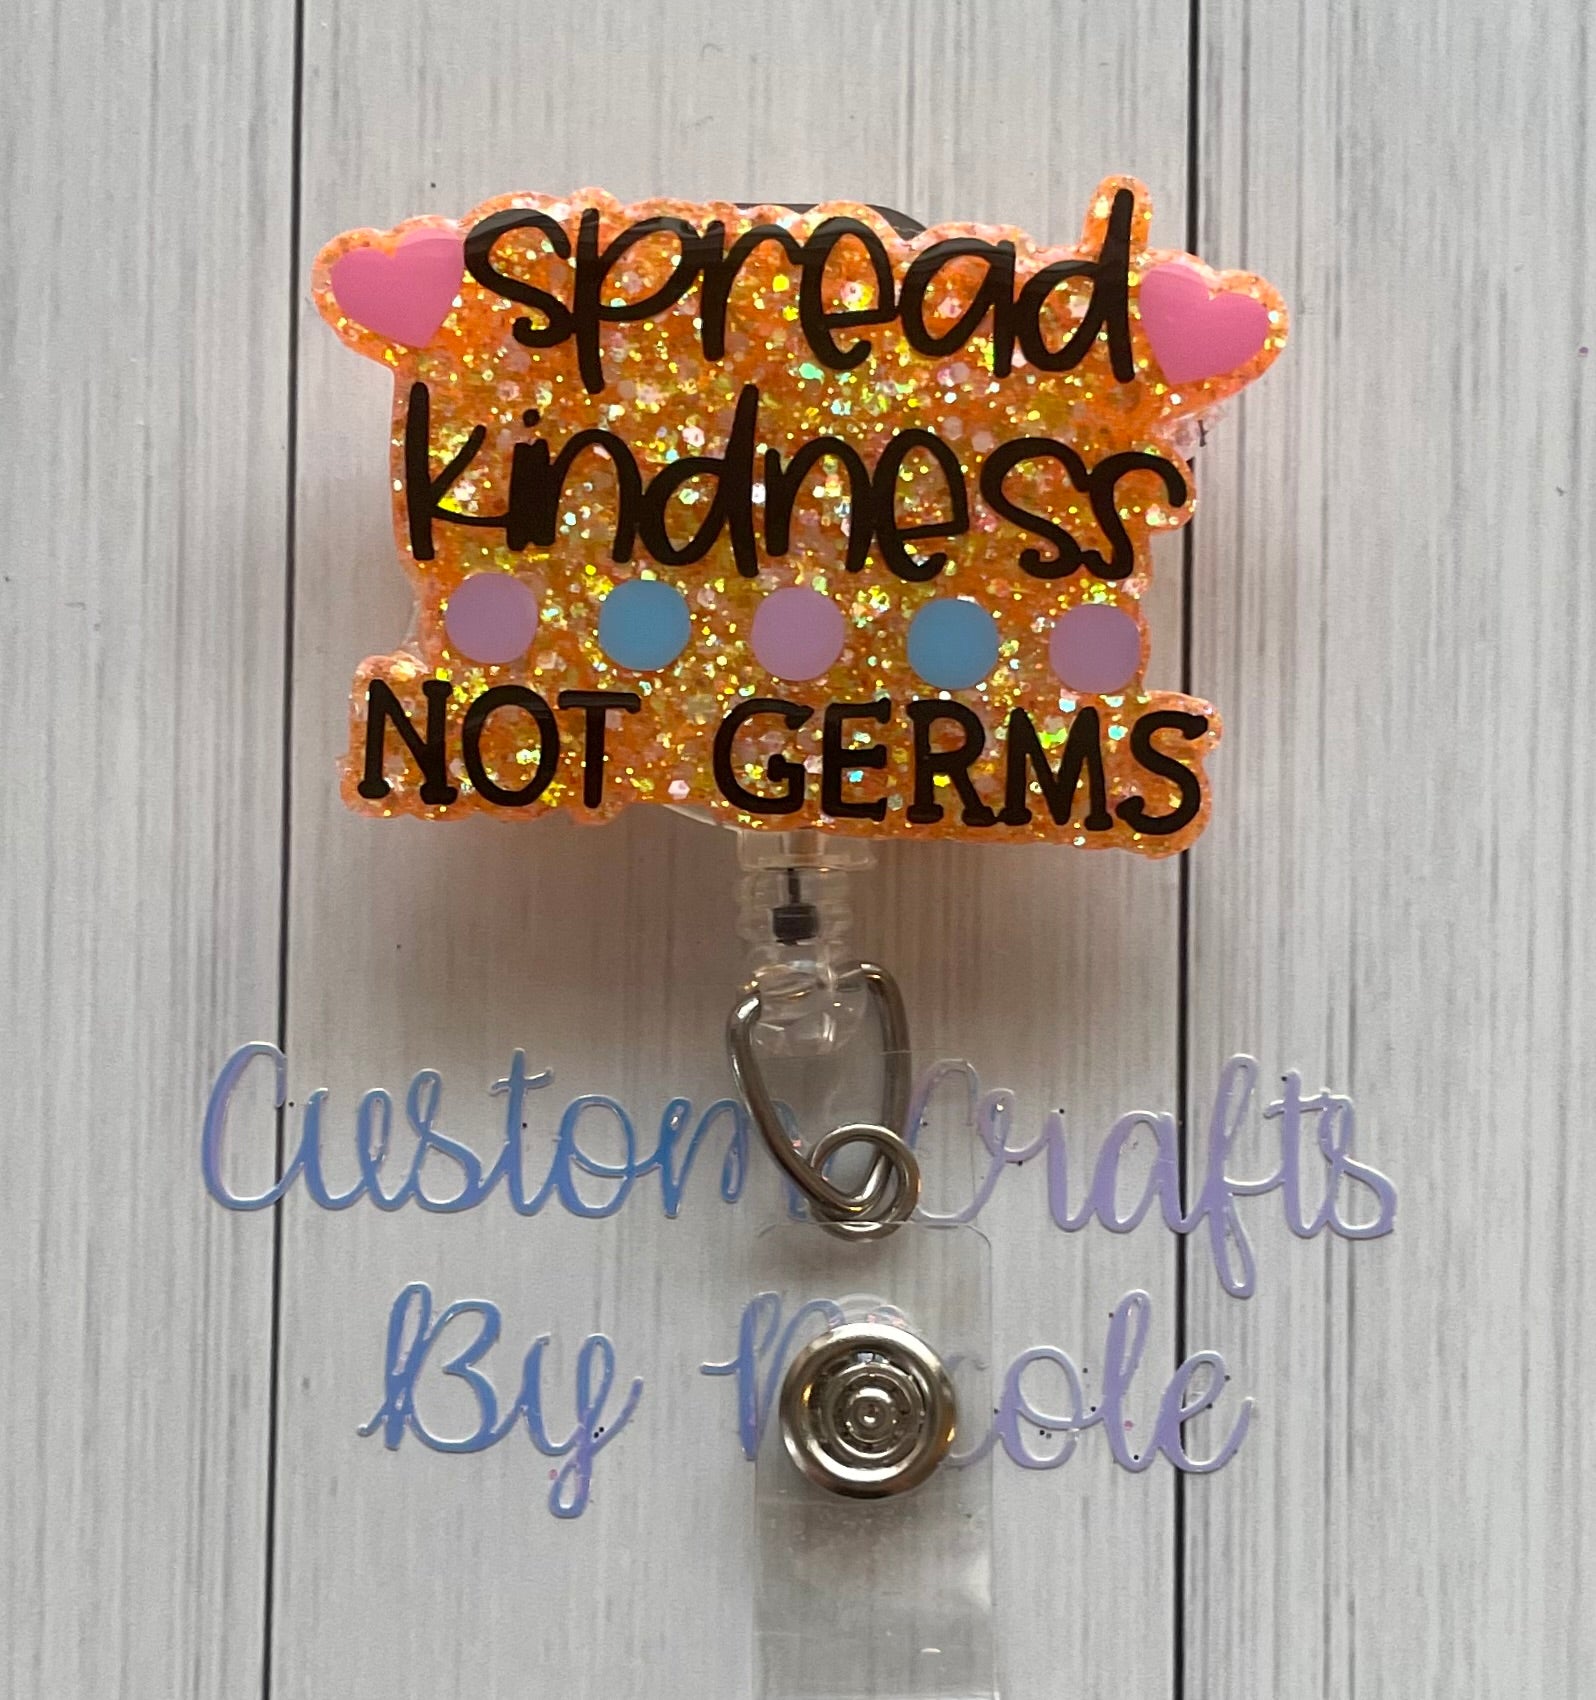 Spread kindness not germs – Custom Crafts by Nicole